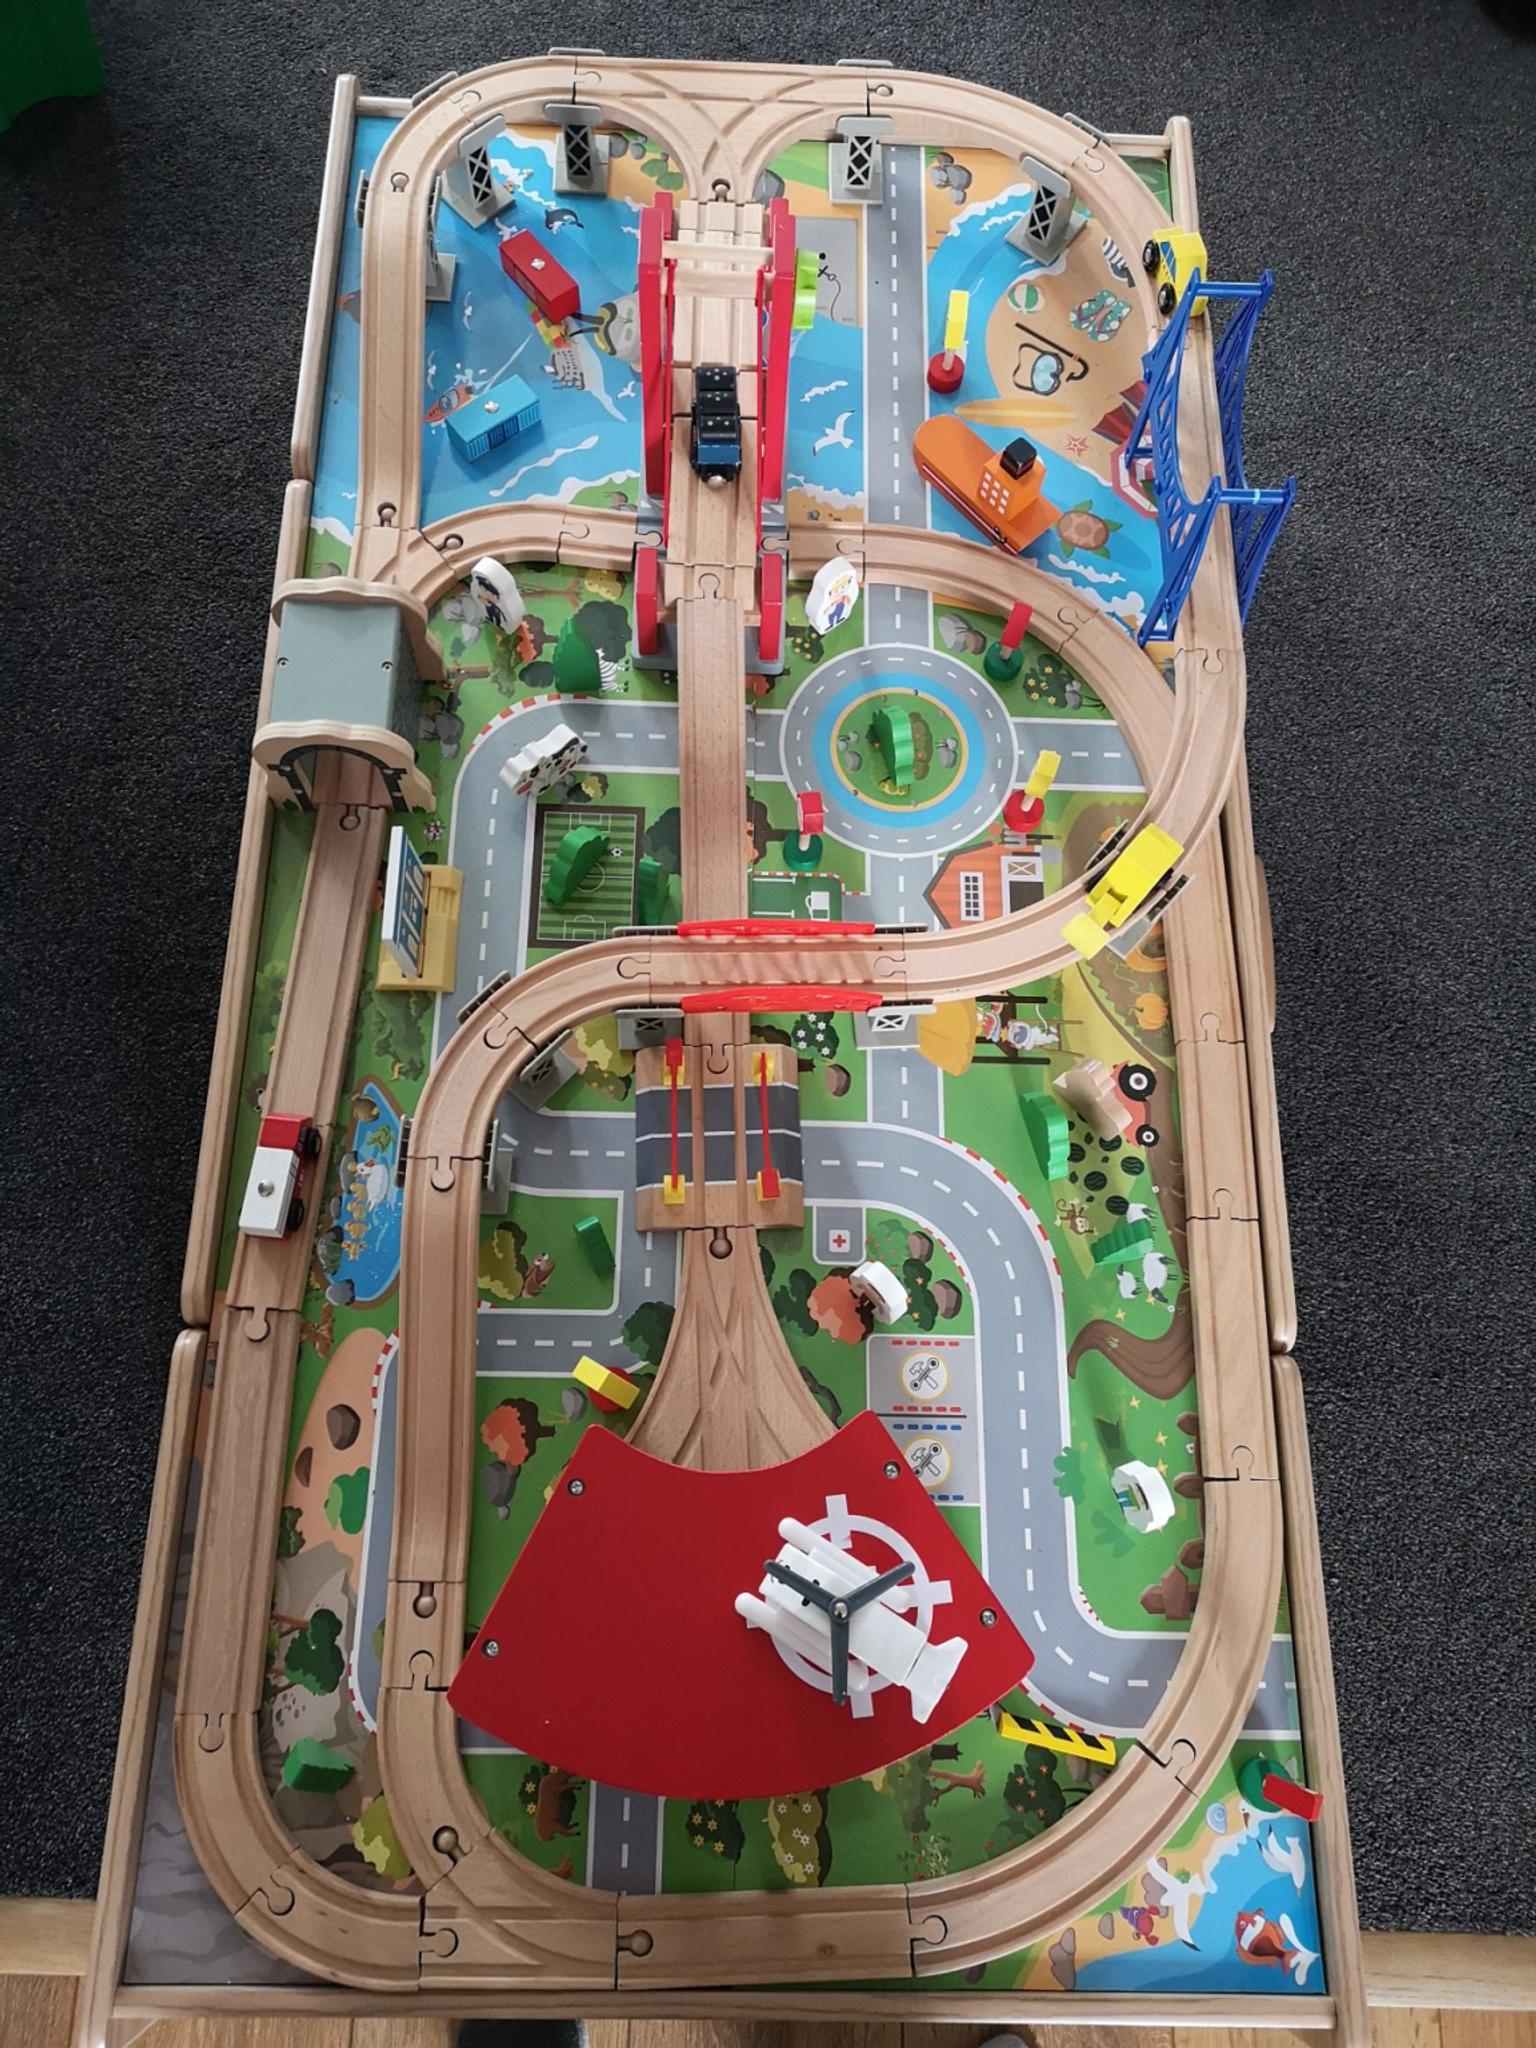 wooden train table smyths